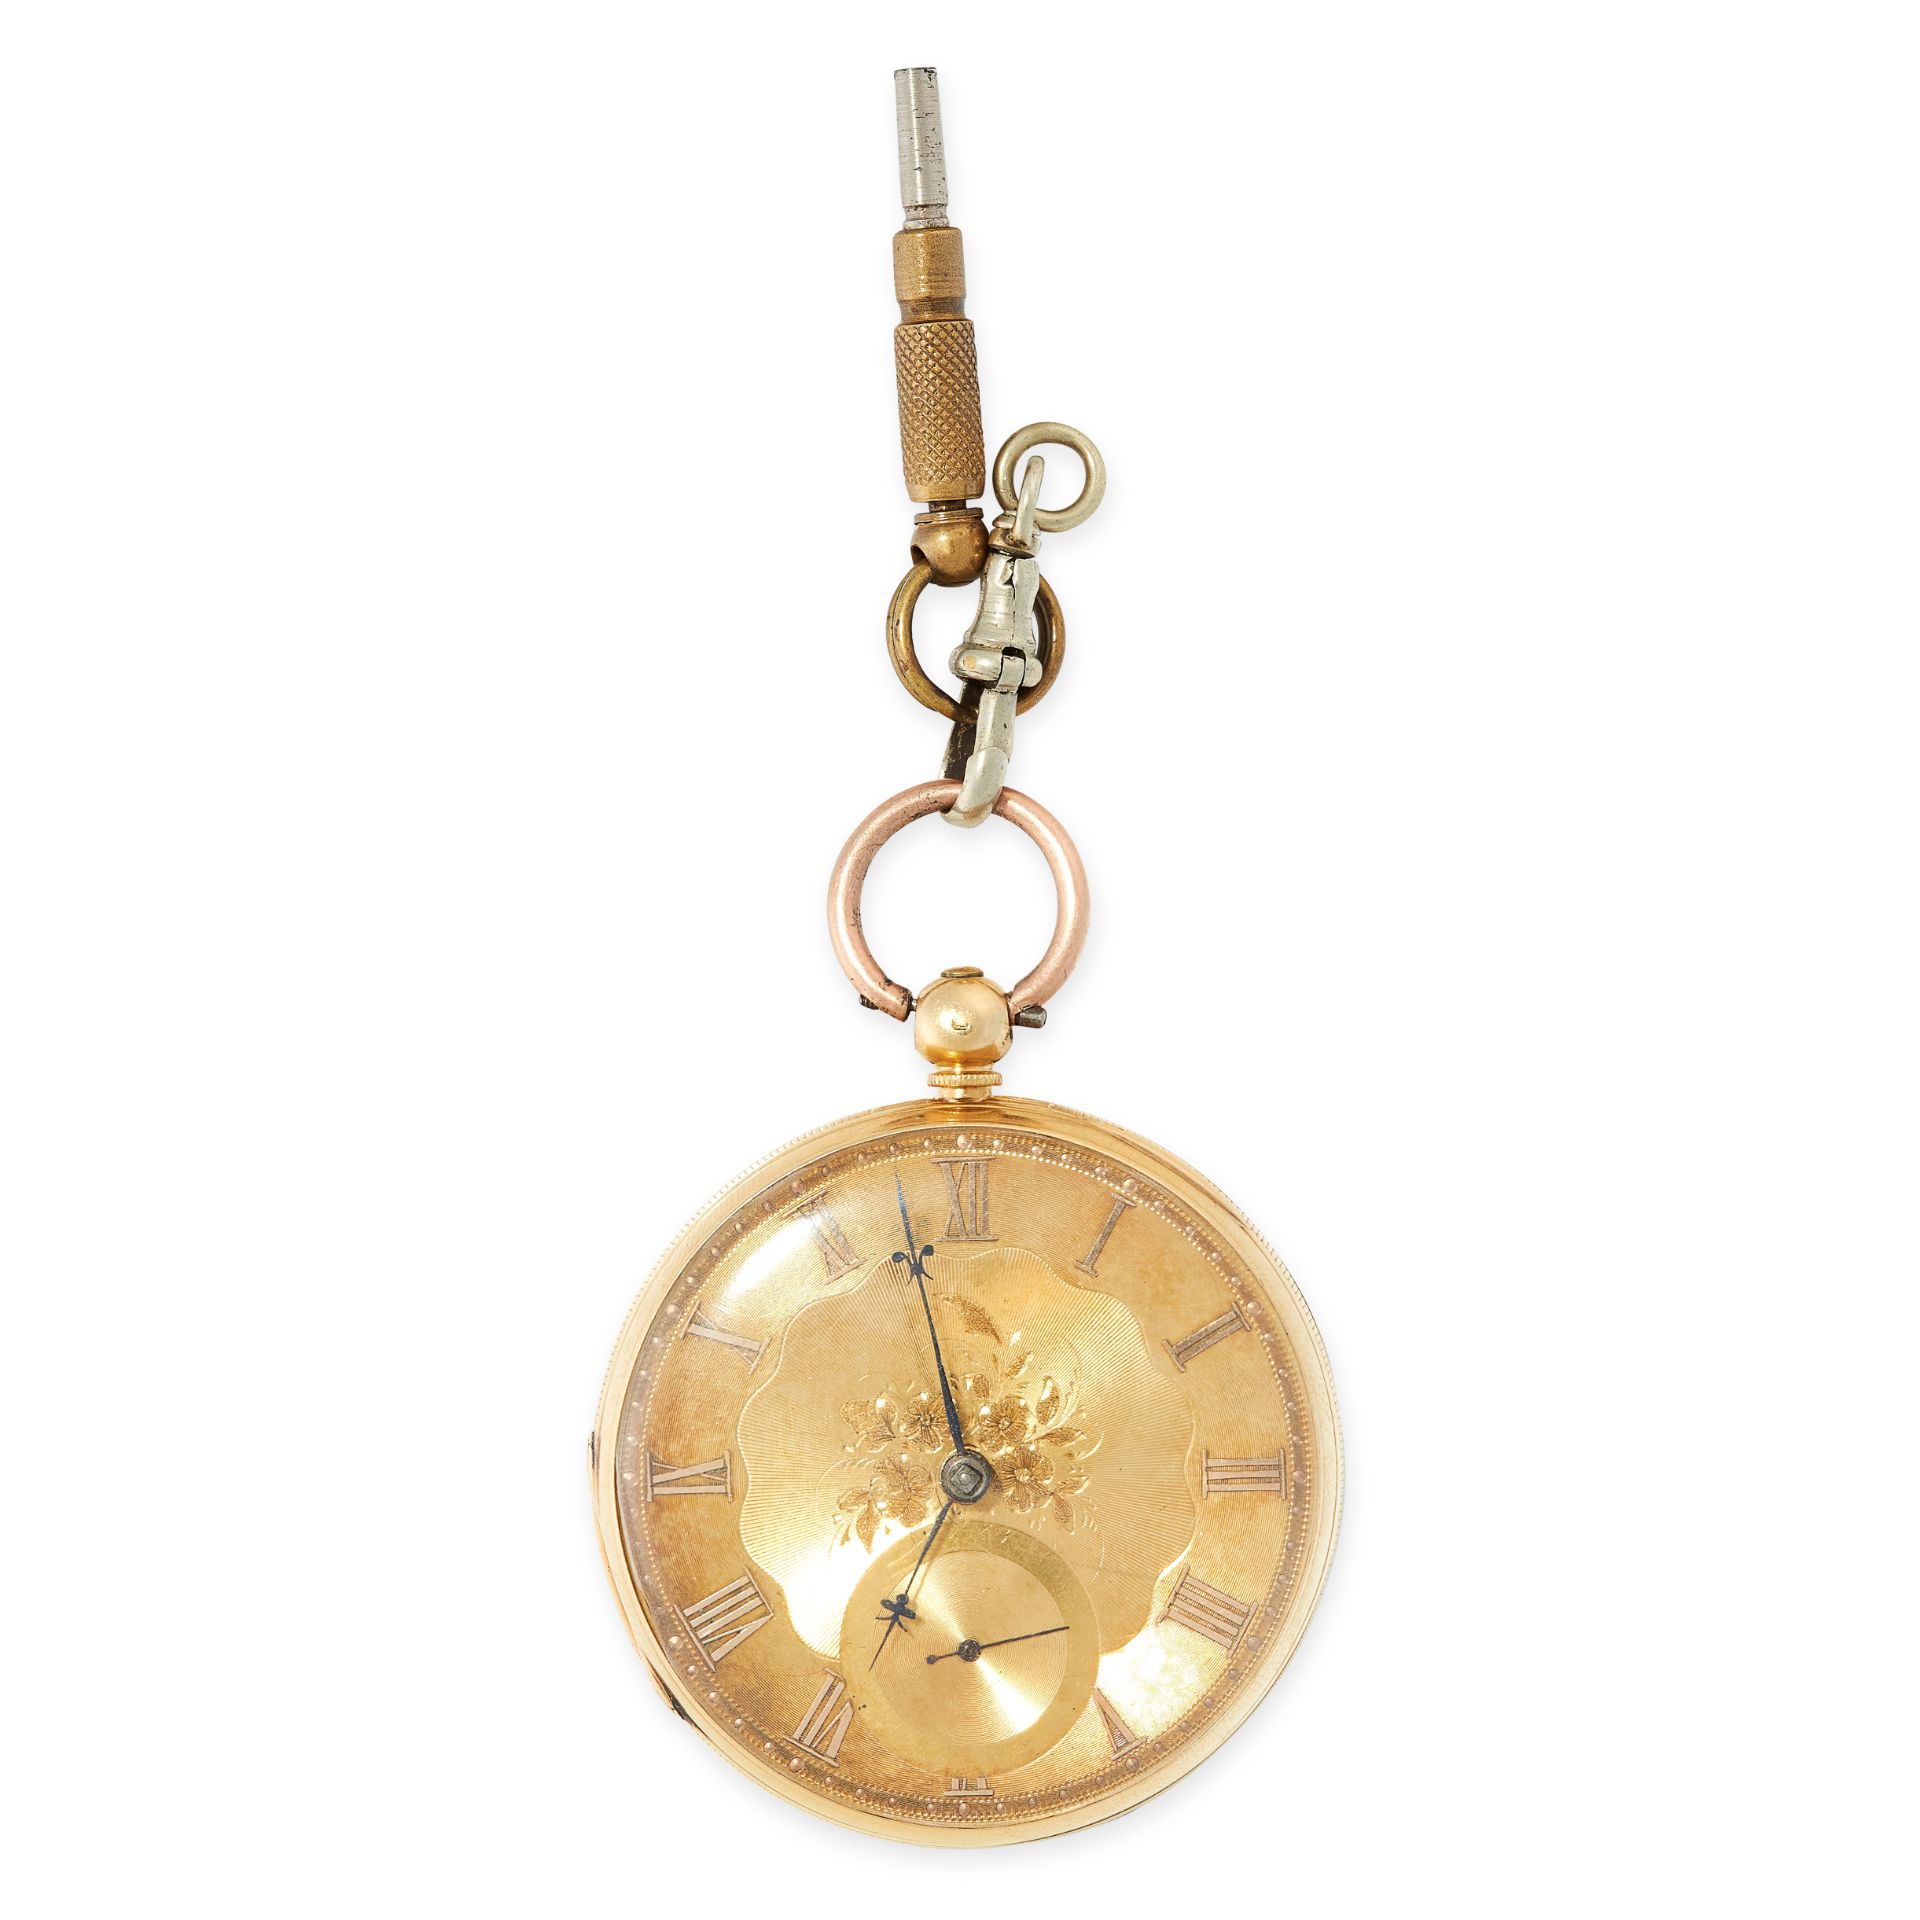 AN ANTIQUE POCKET WATCH 1855 in 18ct yellow gold, the circular dial with raised Roman numerals, a